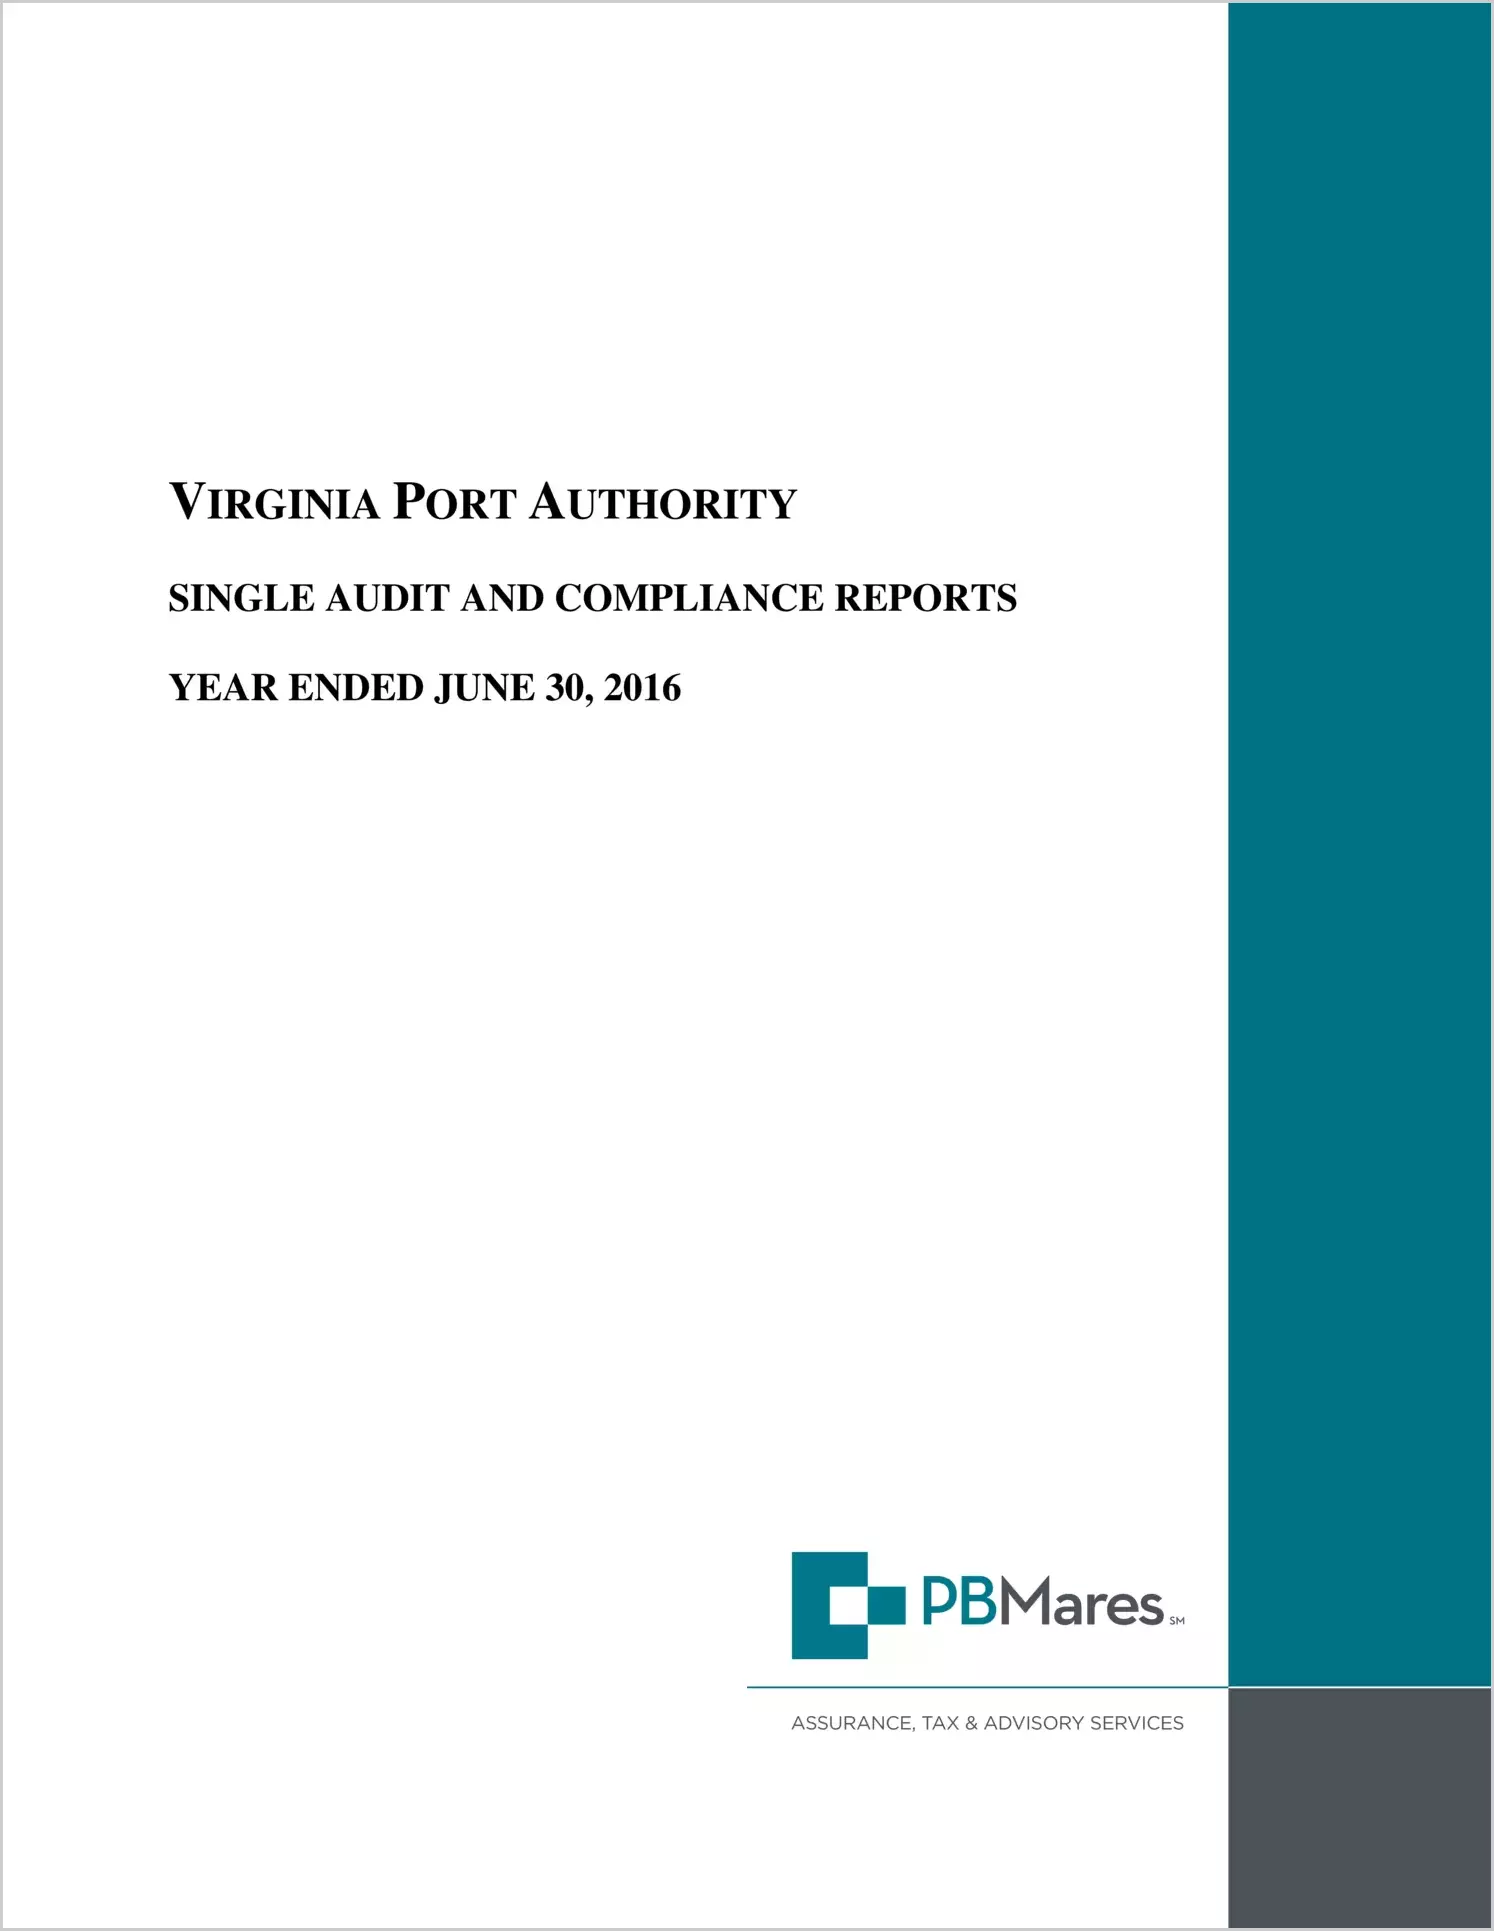 Virginia Port Authority for the year ended June 30, 2016